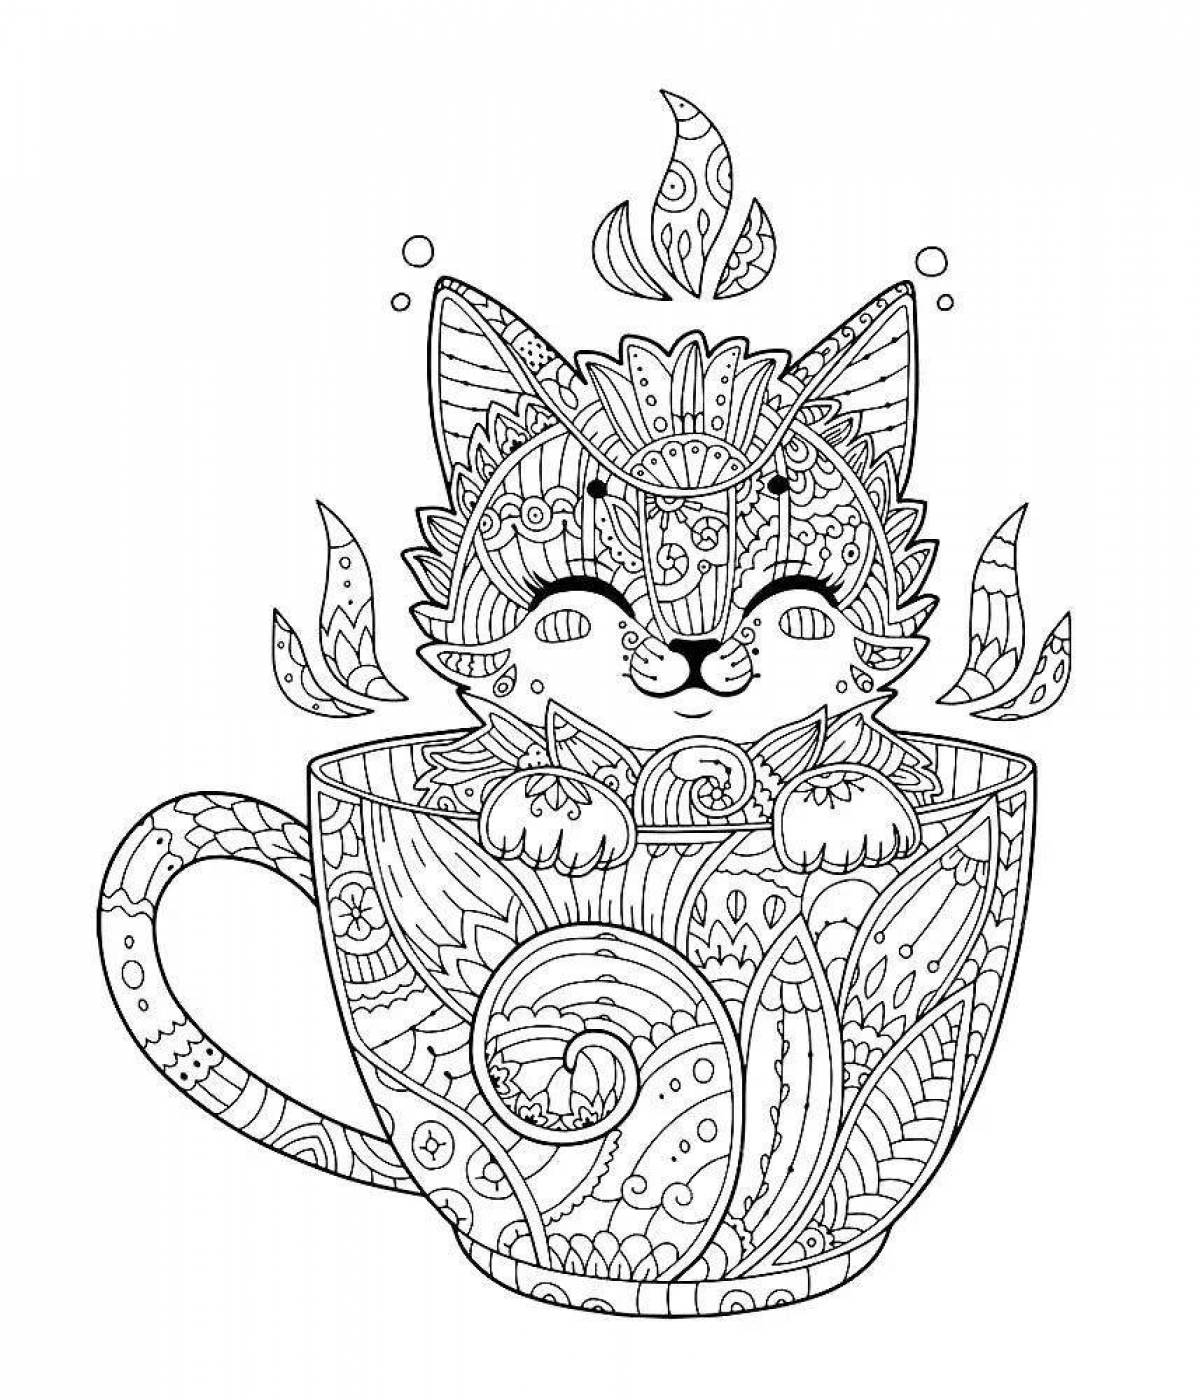 Colourful anti-stress coloring book